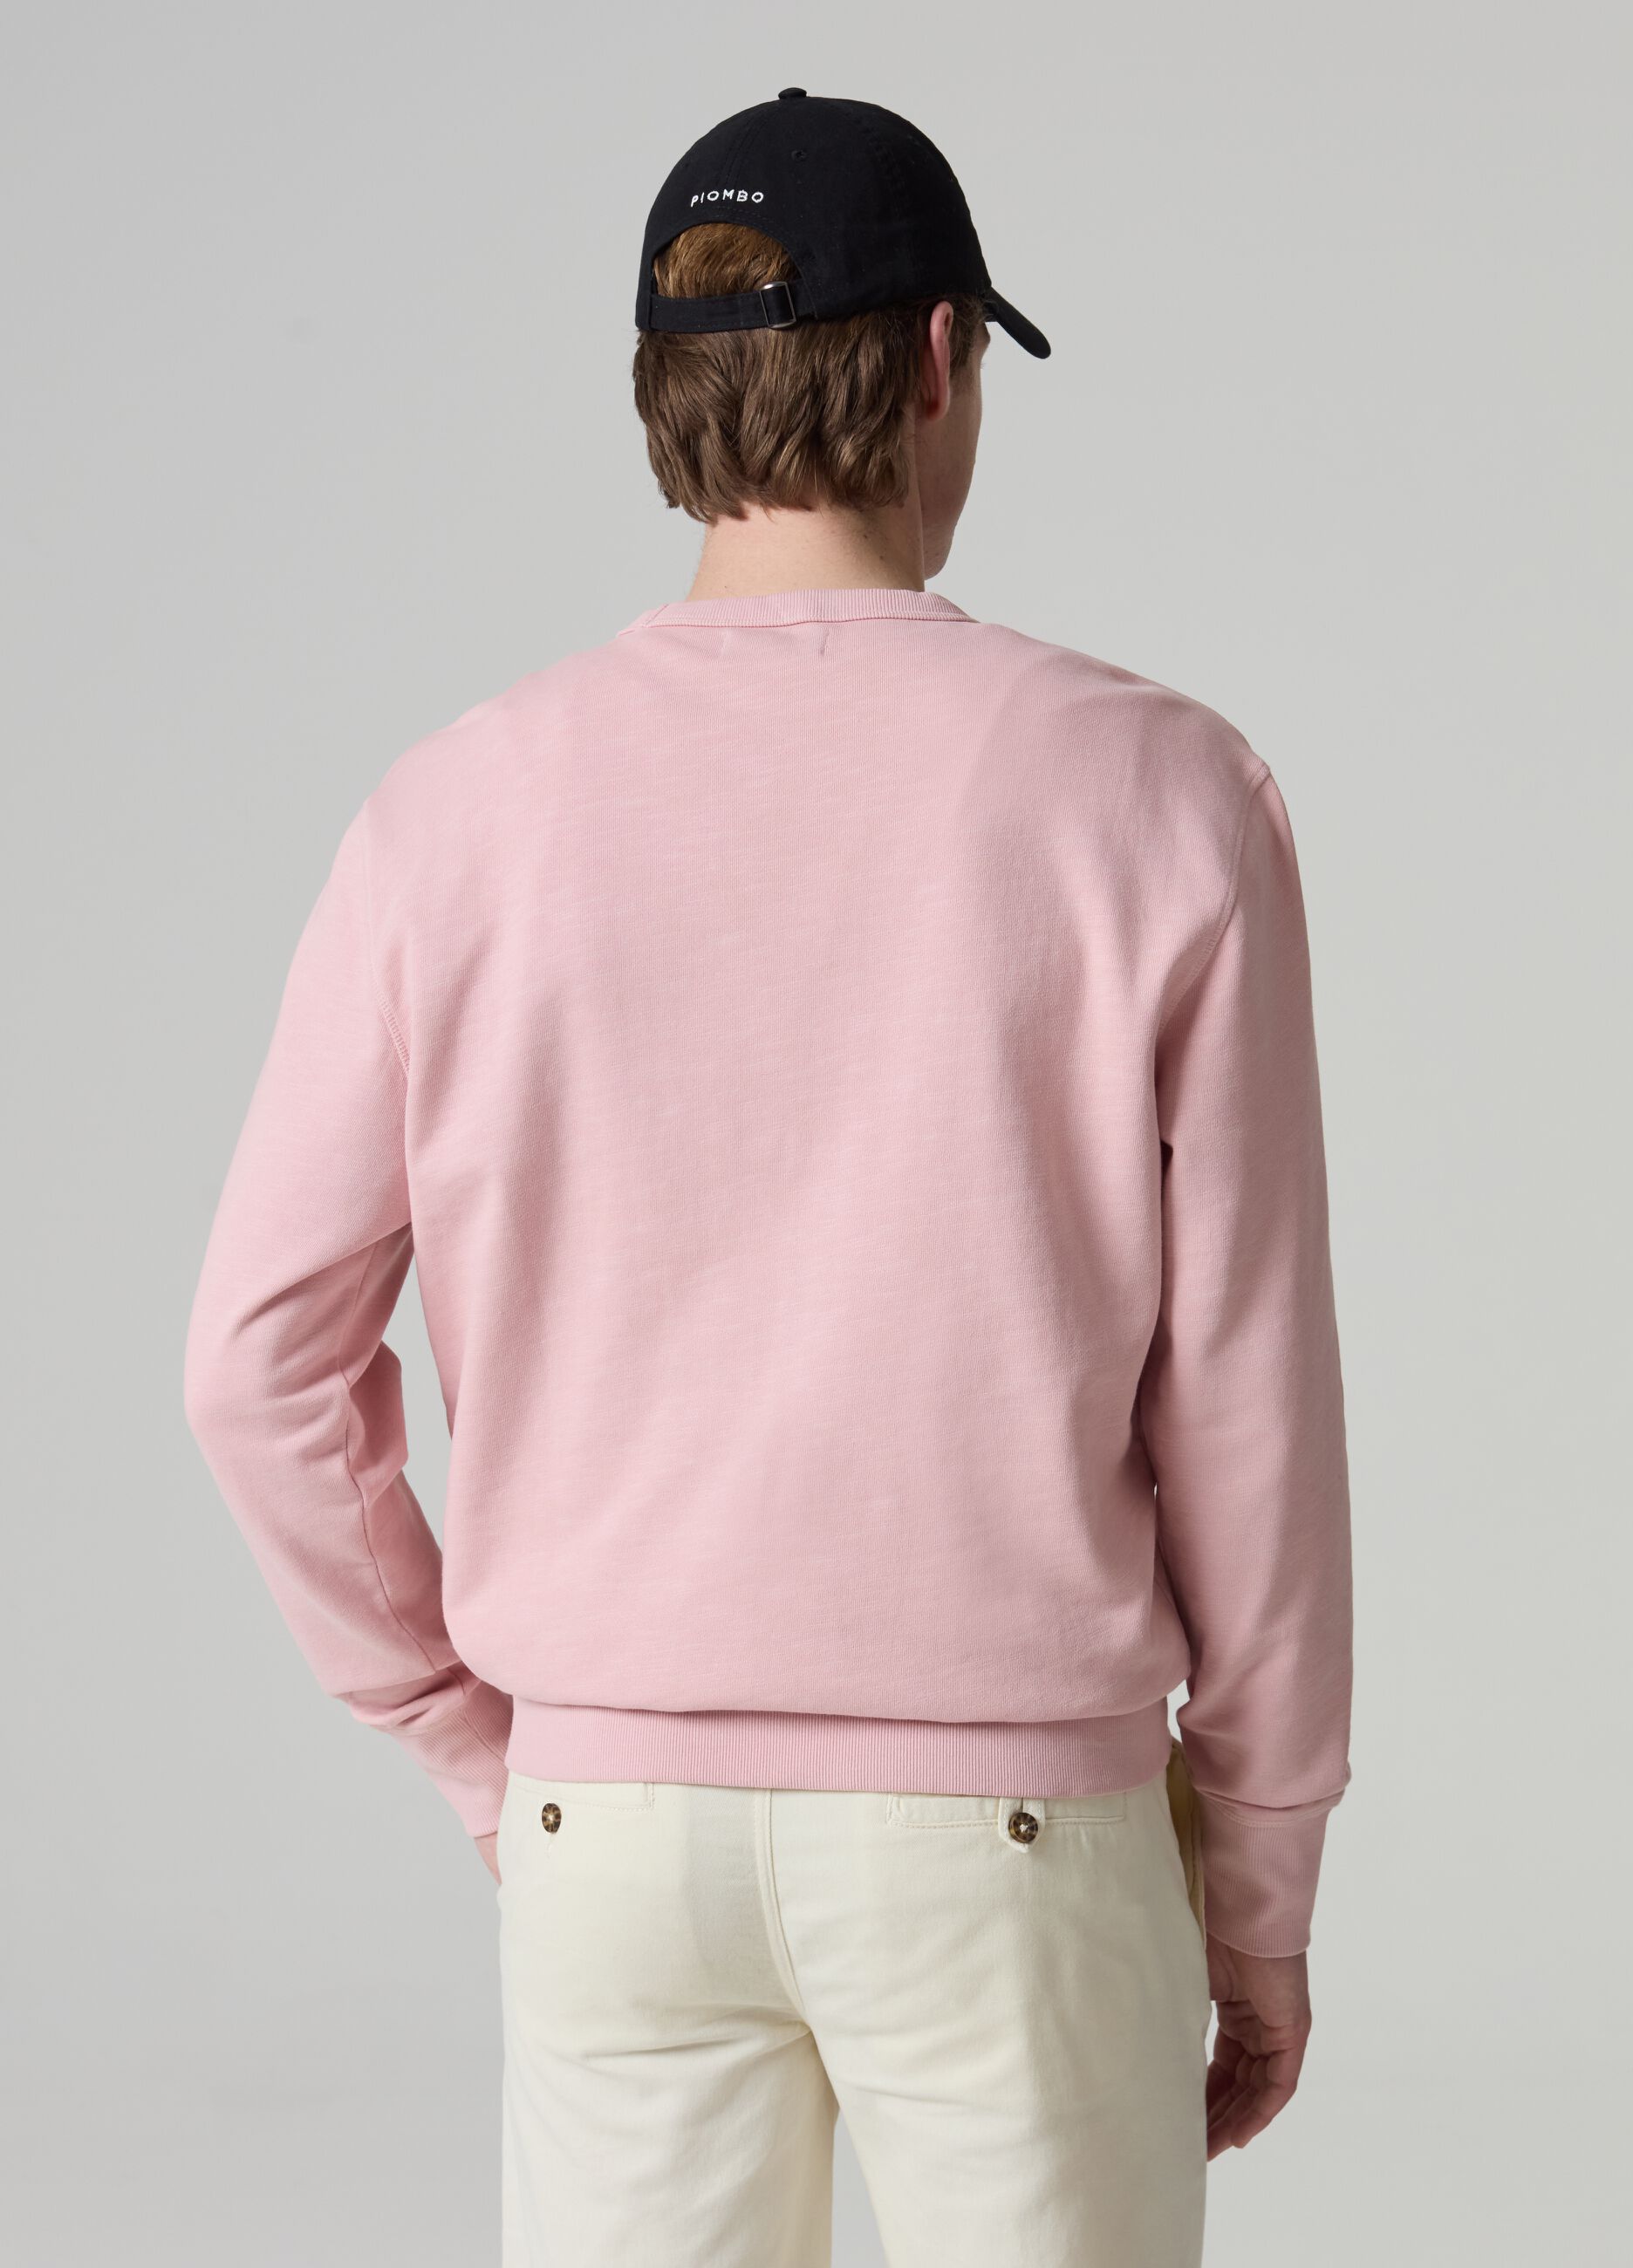 Sweatshirt with round neck and V detail_2